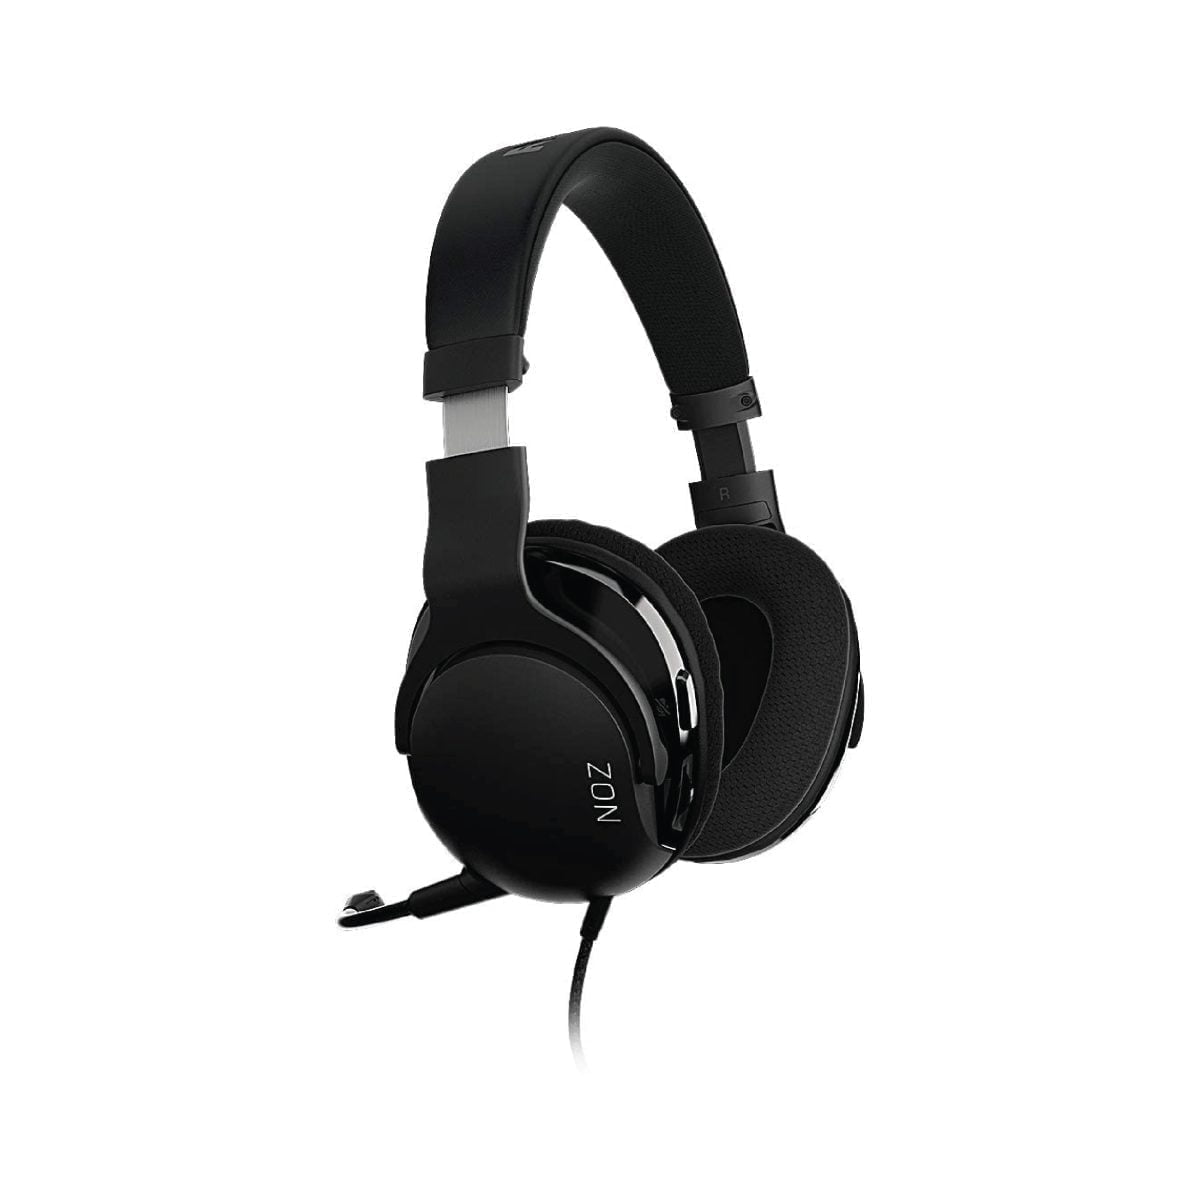 Headphones 26 Roccat &Amp;Lt;Div Id=&Amp;Quot;Main_Textcontent&Amp;Quot;&Amp;Gt; &Amp;Lt;Div Class=&Amp;Quot;Contentrow&Amp;Quot;&Amp;Gt; &Amp;Lt;P Class=&Amp;Quot;Copytext&Amp;Quot;&Amp;Gt;The Noz Features Rich, Natural-Sounding Stereo Audio And Superior Comfort. At Only 210 Grams It Is Ultralight And Boasts Innovations Such As A Fabric That Keeps Cool During Wear And Earcups With Extra Space For Better Acoustics.&Amp;Lt;/P&Amp;Gt; &Amp;Lt;/Div&Amp;Gt; &Amp;Lt;/Div&Amp;Gt; Roccat Noz Stereo Gaming Headset Roccat Noz Stereo Gaming Headset